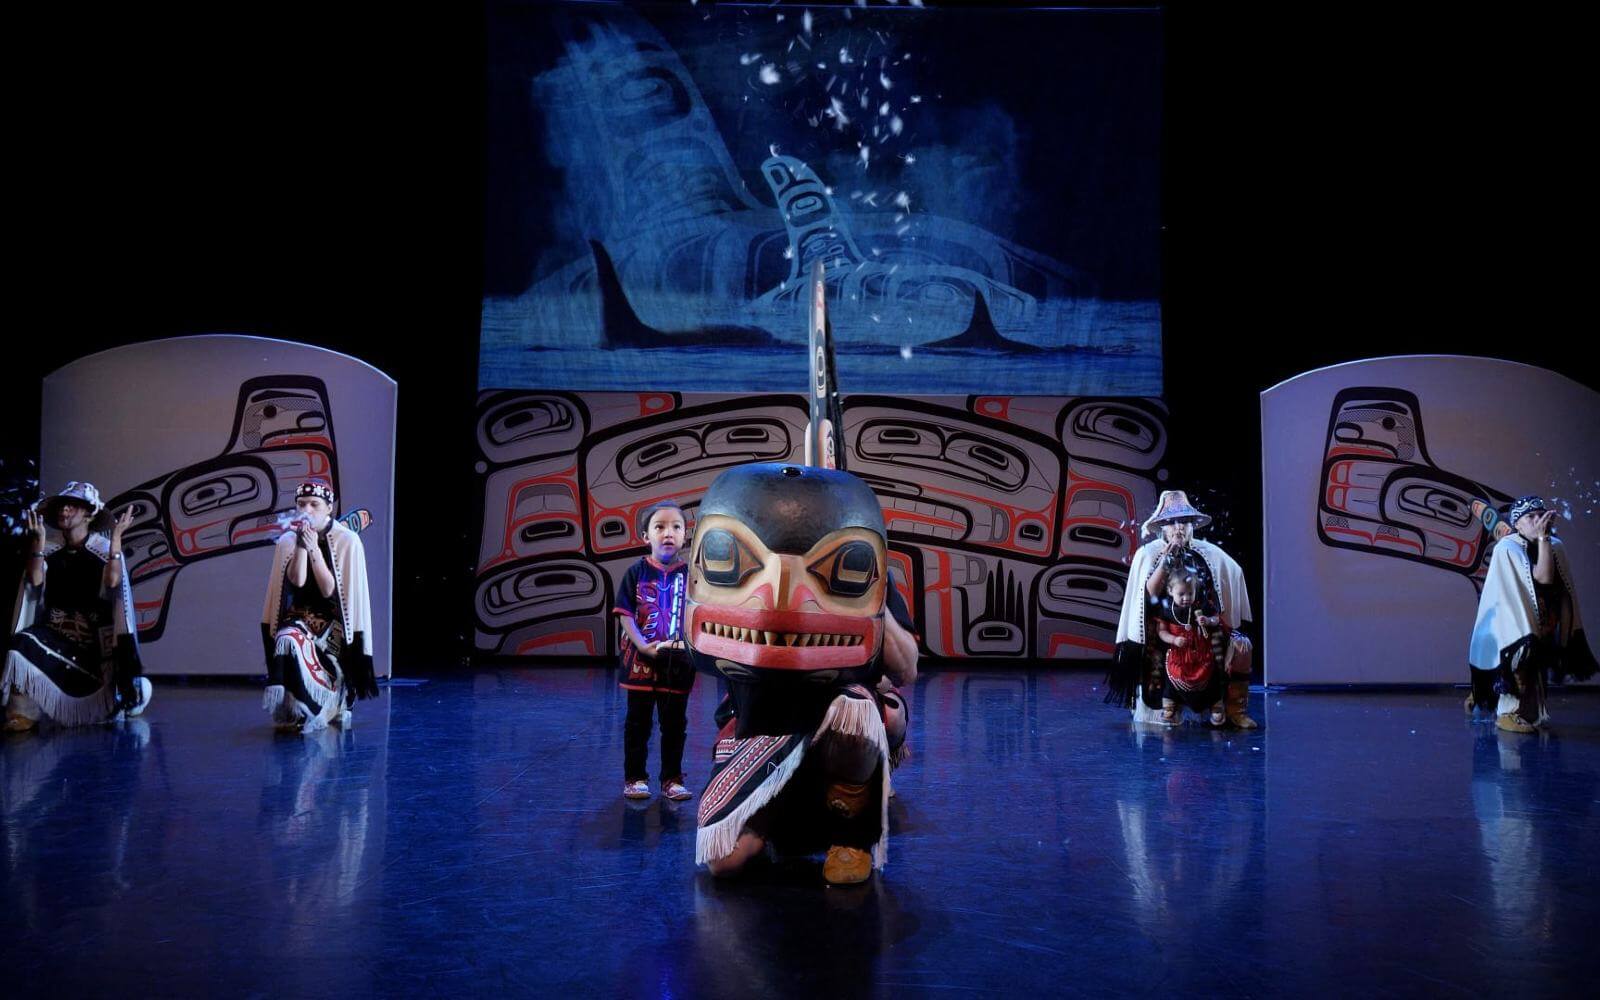 first nations dancers performing at the international children's festival in vancouver bc canada